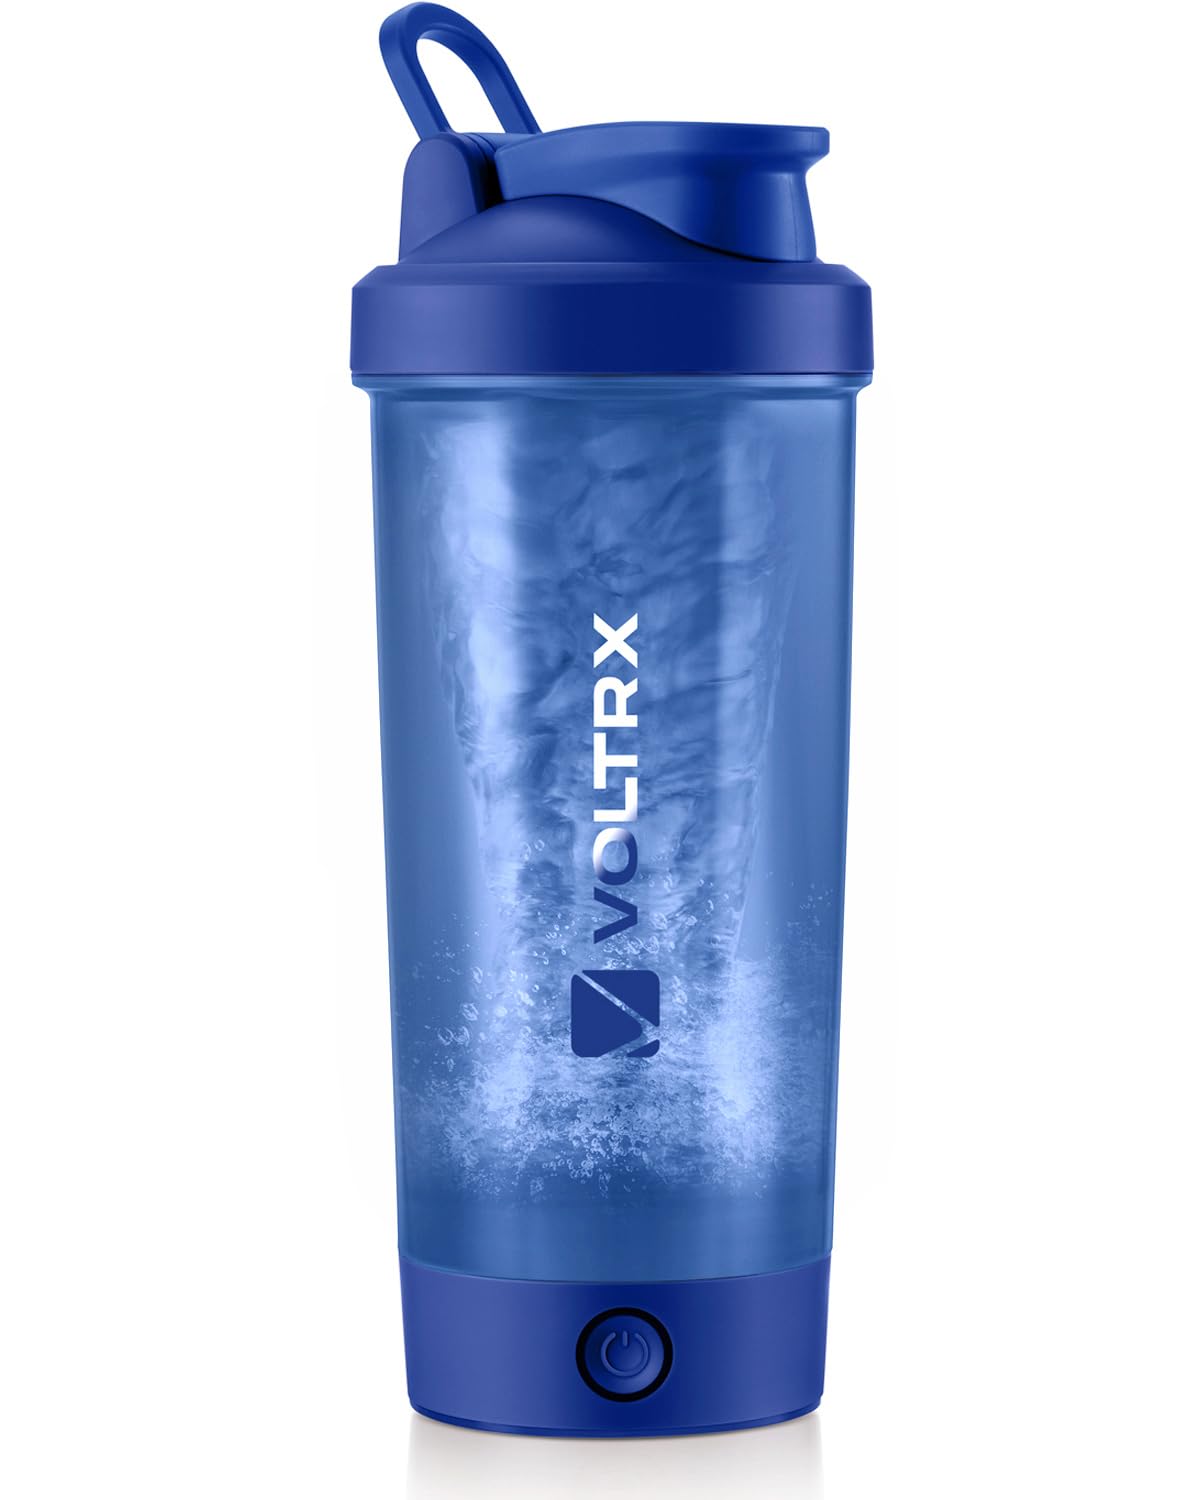 VOLTRX Protein Shaker Bottle, Merger USB c Rechargeable Electric Protein Shake Mixer, Shaker cups for Protein Shakes and Meal Re